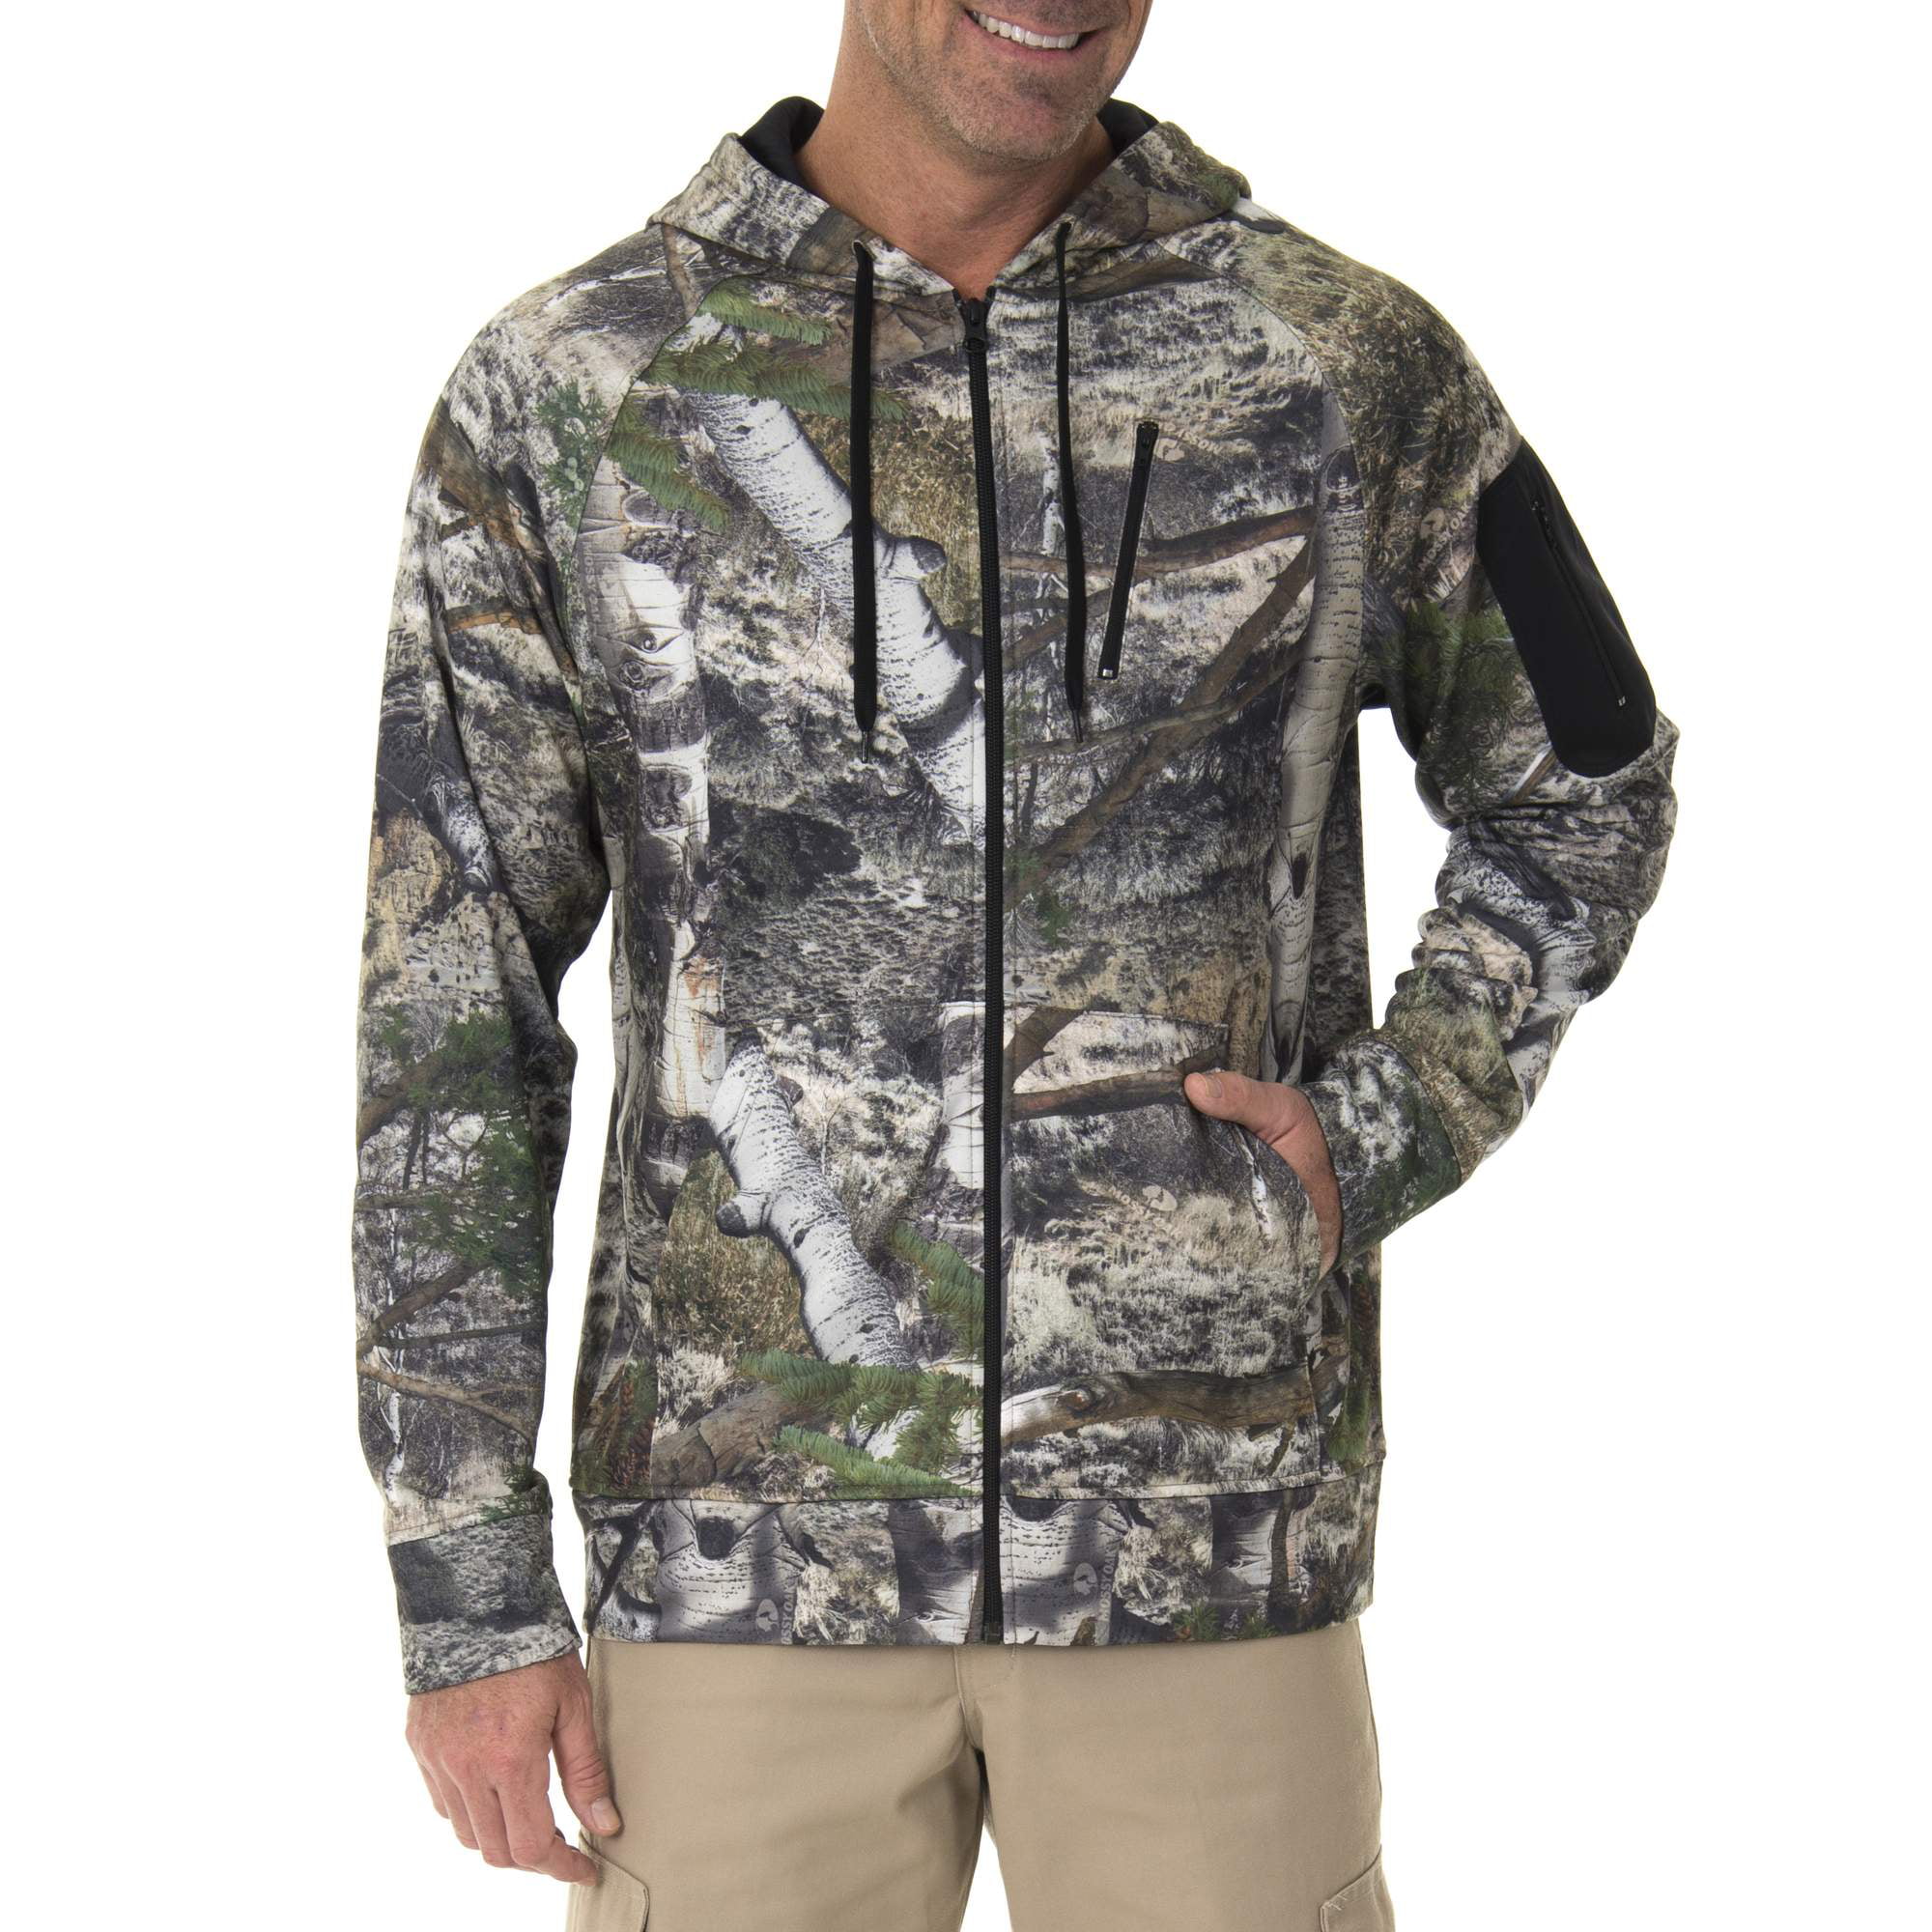 REALTREE Mossy Oak Camo Hunting Camping Fishing Pullover Fleece Hoodies S  to 5XL